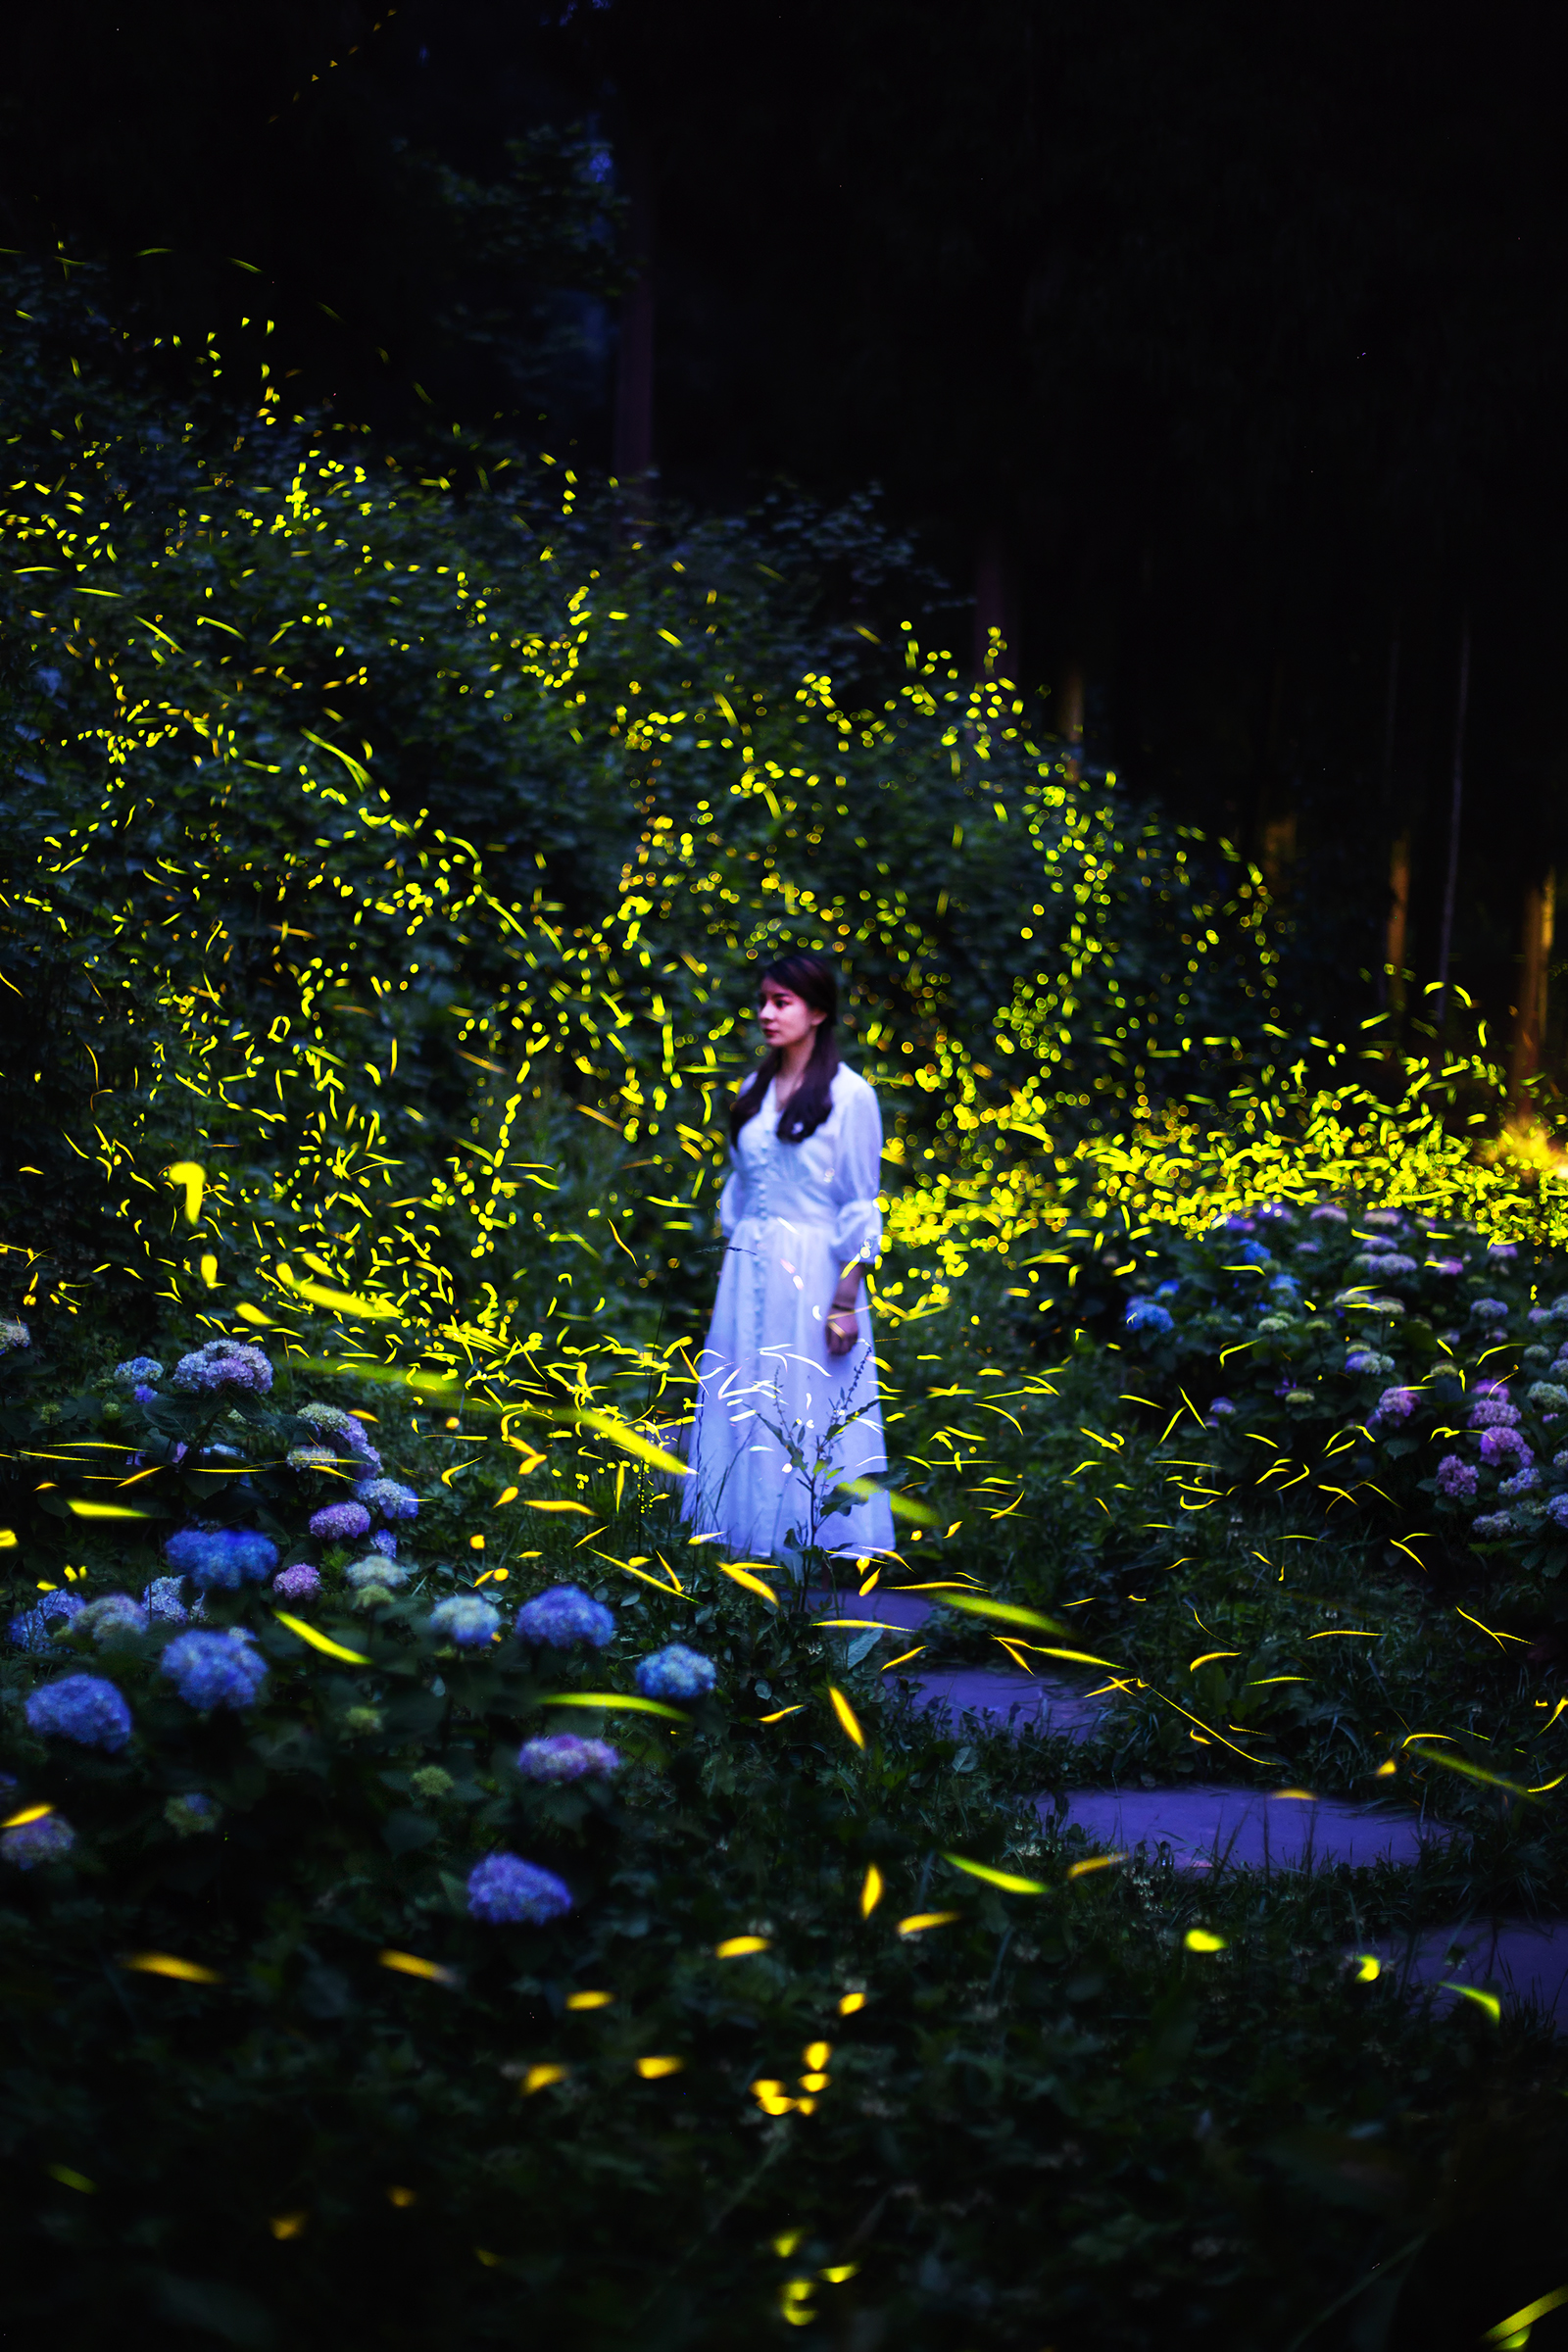 A woman admires the fireflies at the Tiantai Mountain scenic area in Qionglai, Sichuan Province. /Provided to CGTN by Qionglai Branch Venue of International Horticultural Exhibition 2024 Chengdu